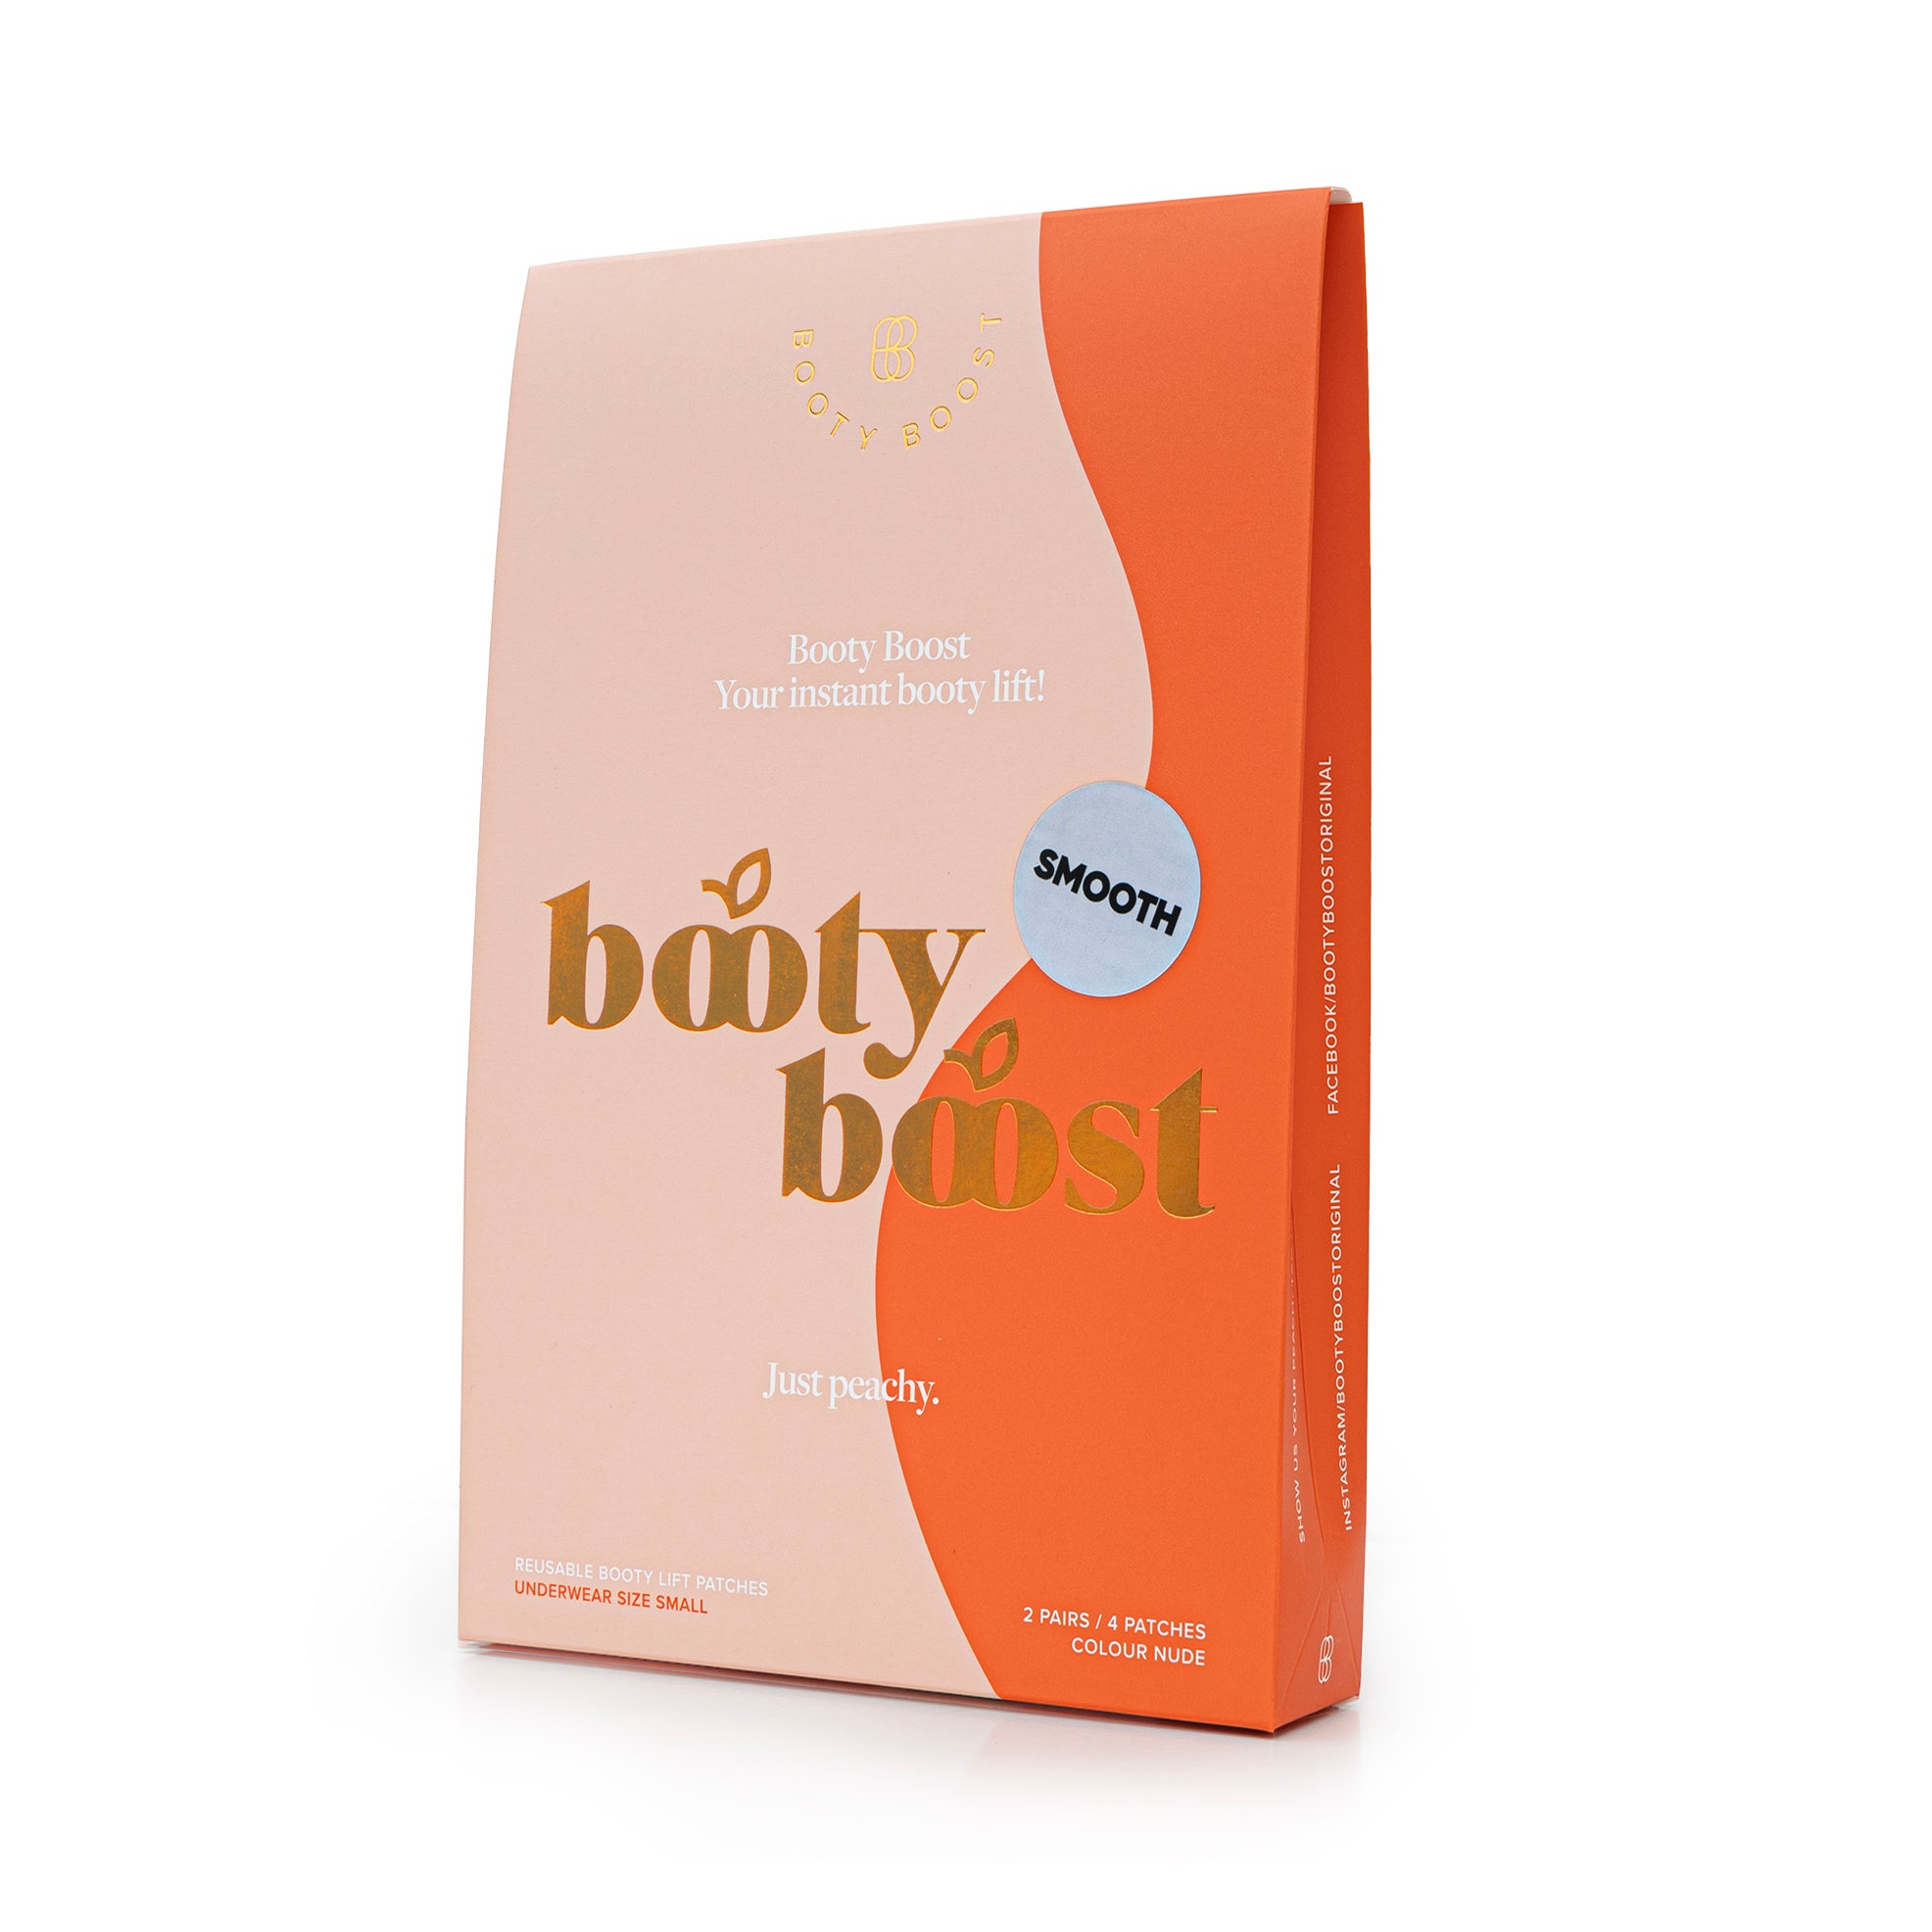 Booty Boost Smooth Patches Medium – Booty Boost Original